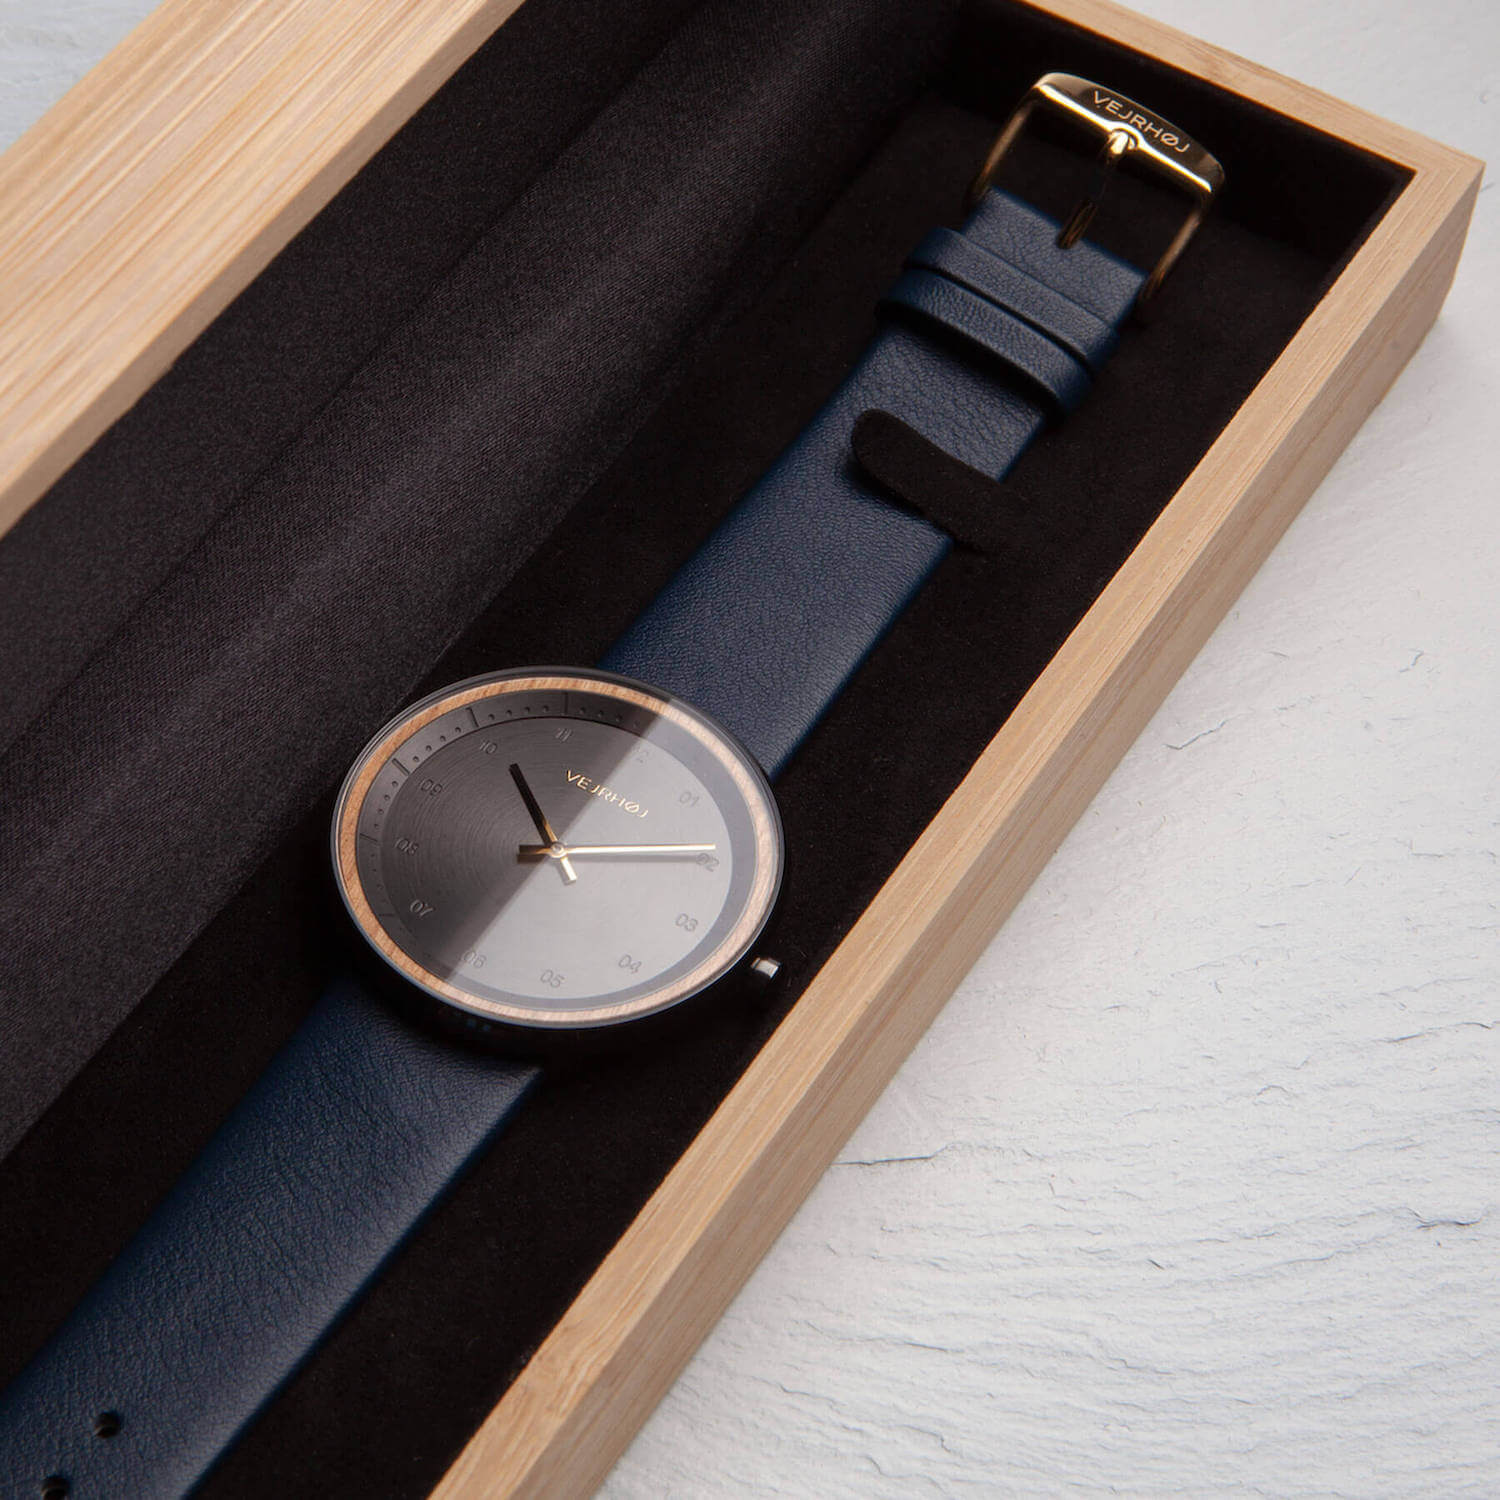 Nordic black watch with a blue strap in a wooden box